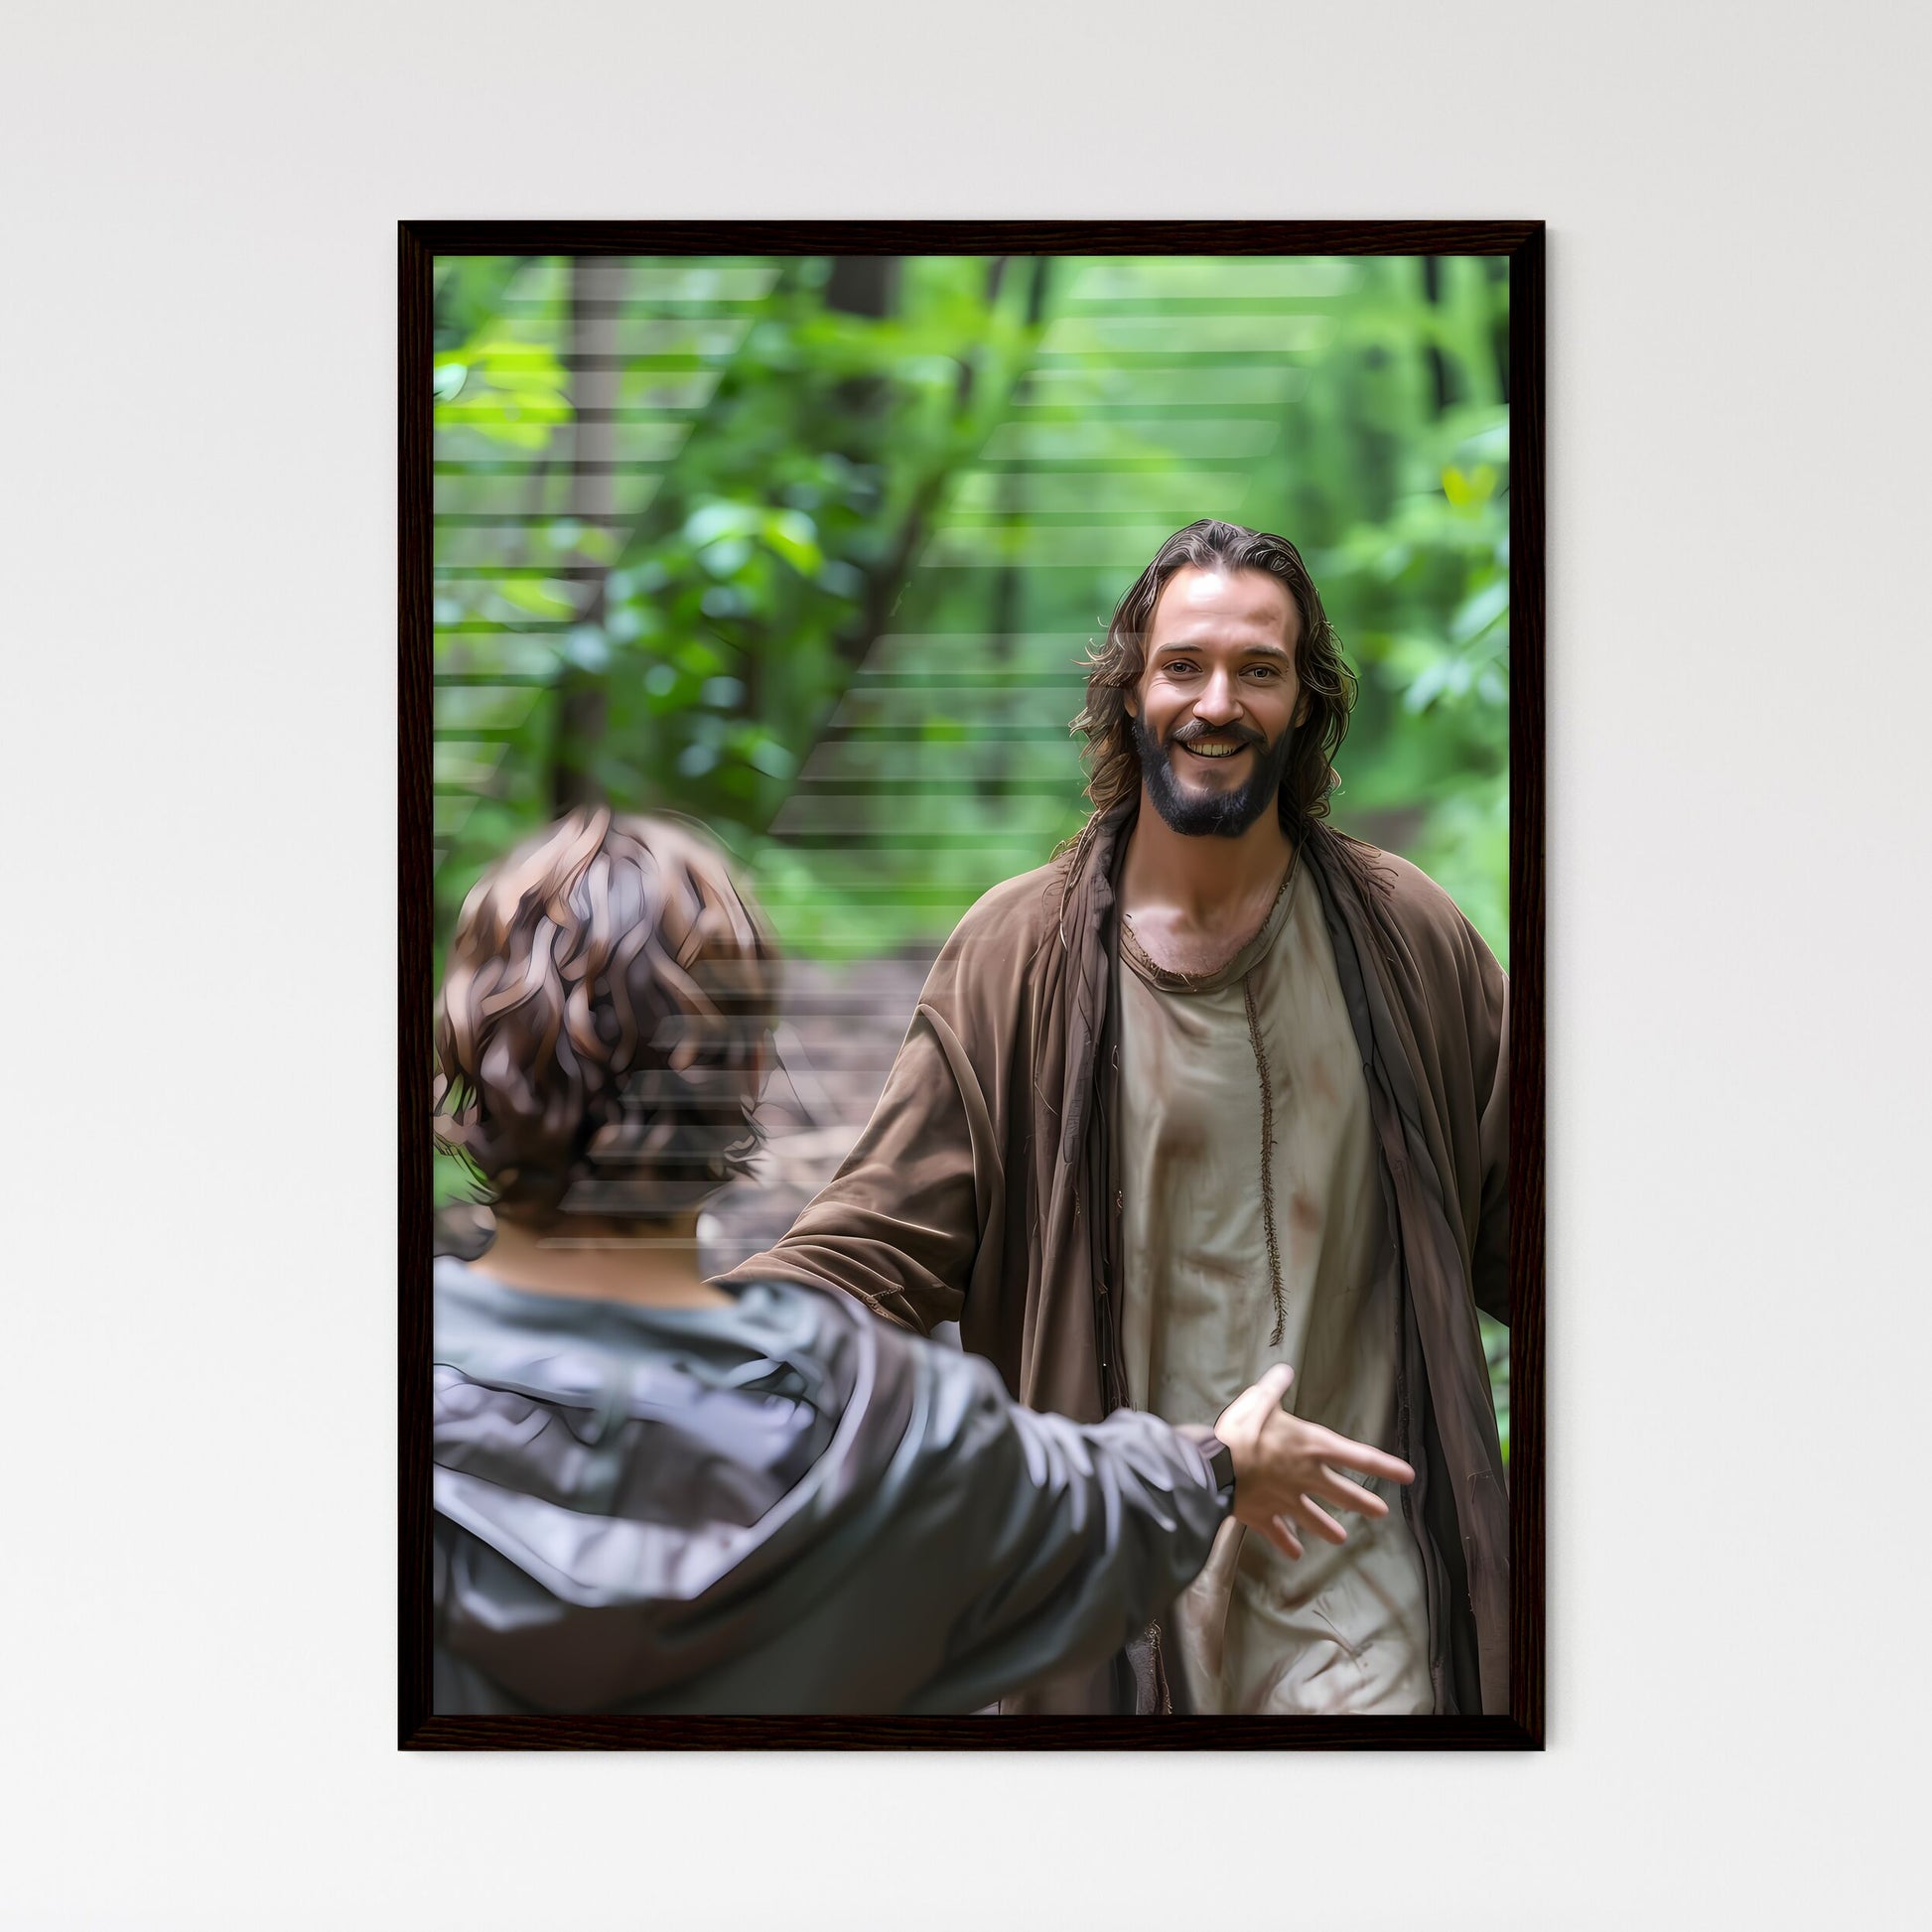 We see the back of young woman with dark wavy hair wearing a brown dress is running toward Jesus a man with dark long hair and a brown rugged robe - Art print of a man in a robe talking to a person in the woods Default Title